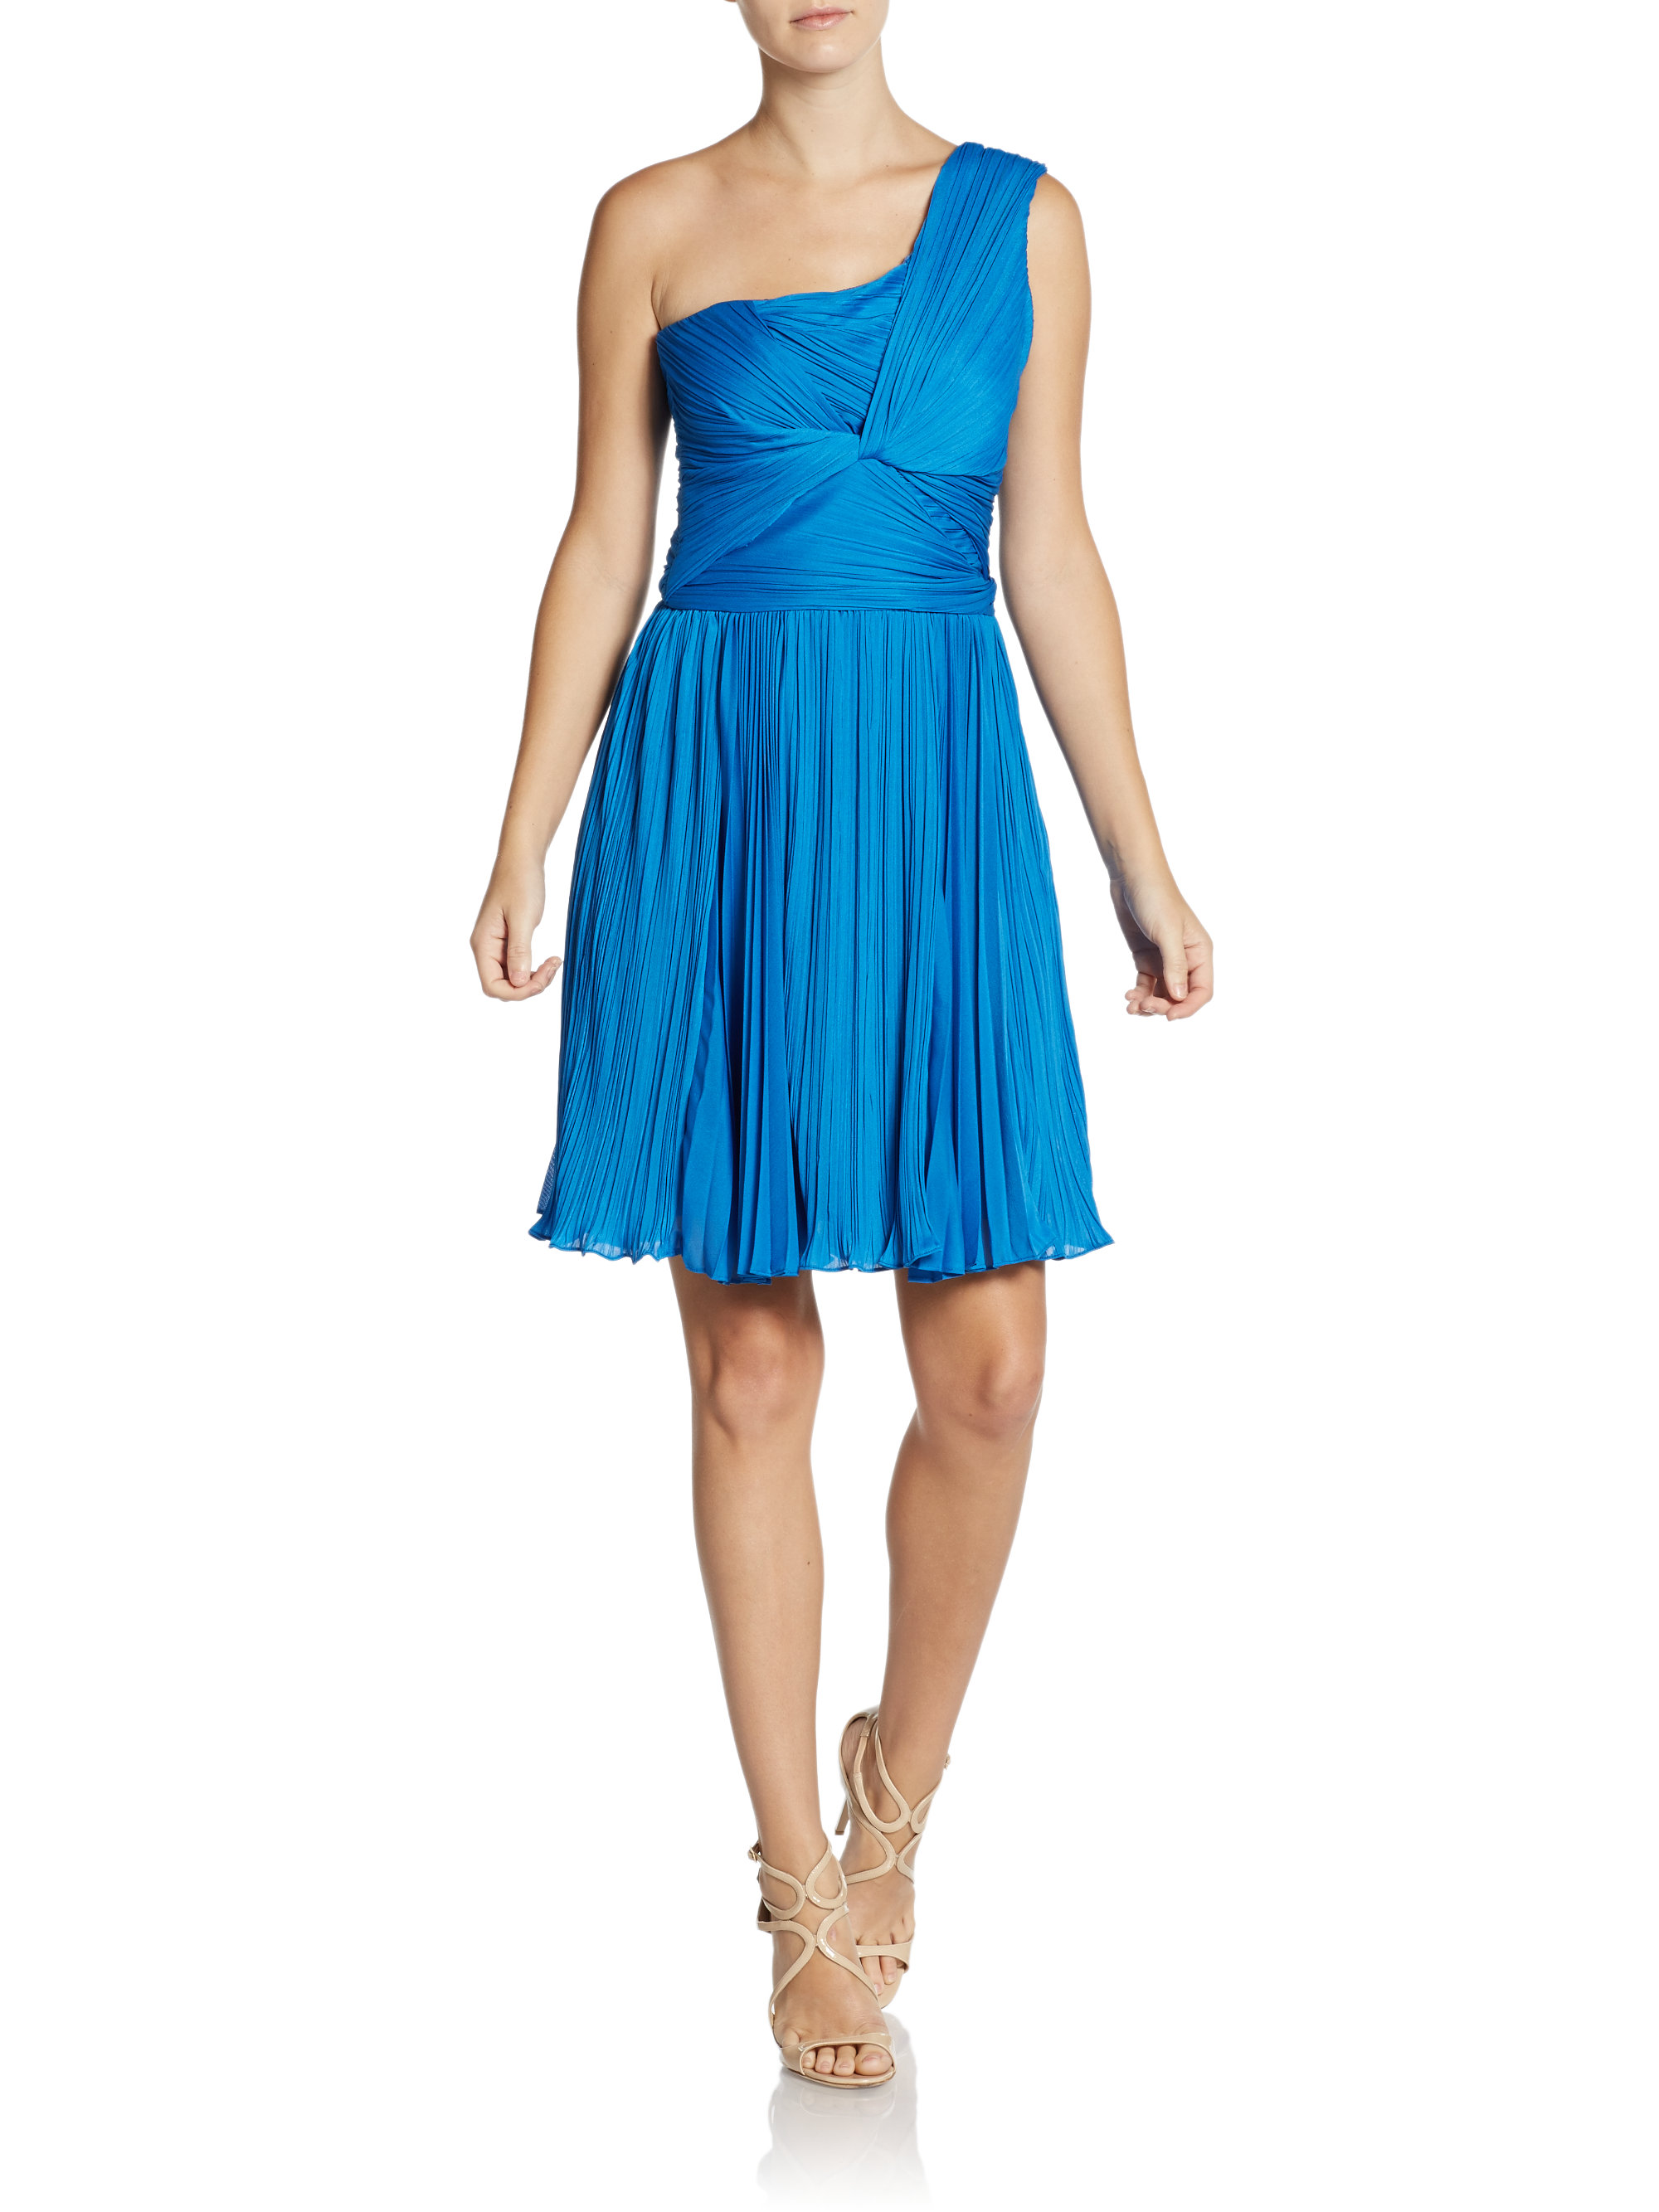 Lyst - Halston Knotted One Shoulder Cocktail Dress in Blue